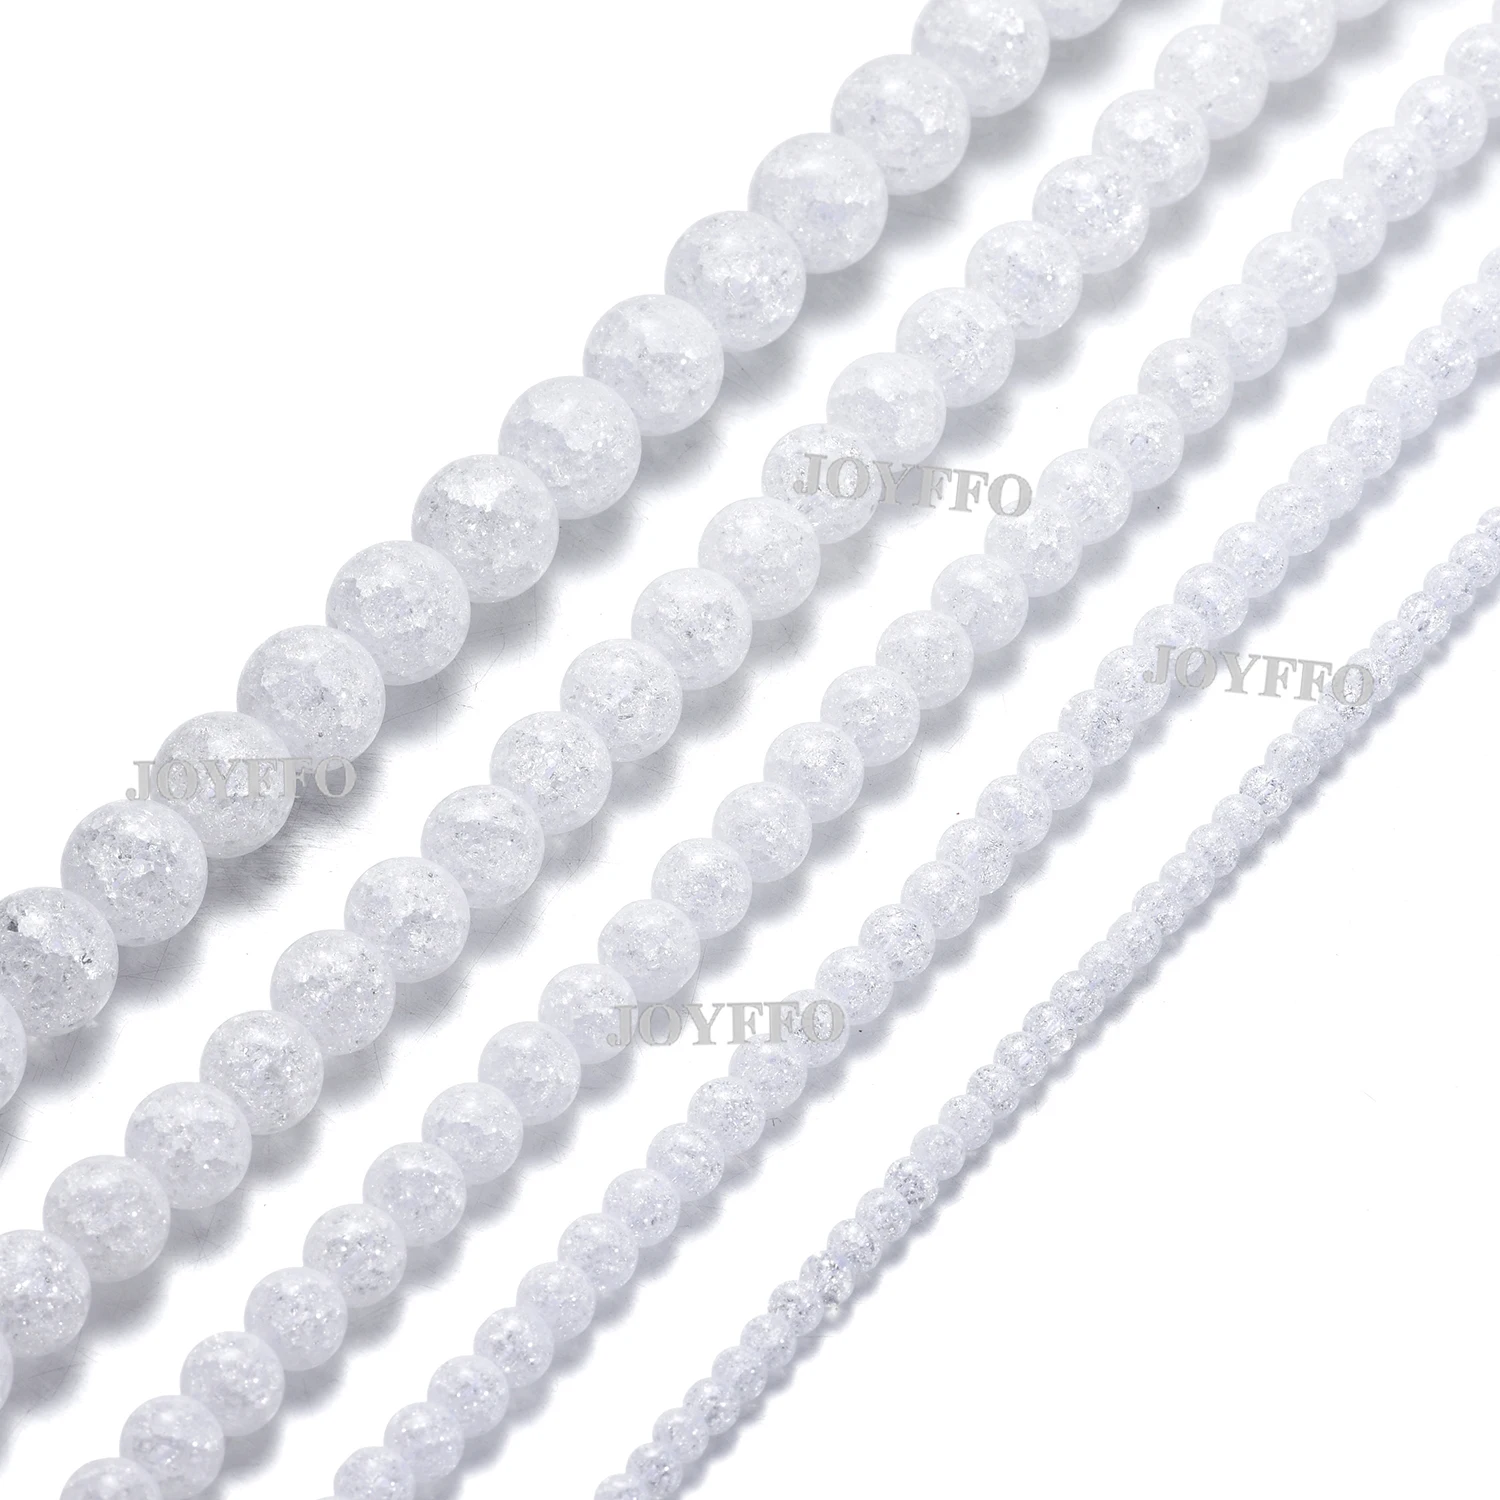 

2020 Amazon Hot-selling Faceted Round 6mm 8mm 10mm White Cracked Glass Crystal Round Loose Beads in Bulk For DIY Jewelry Making, Picture